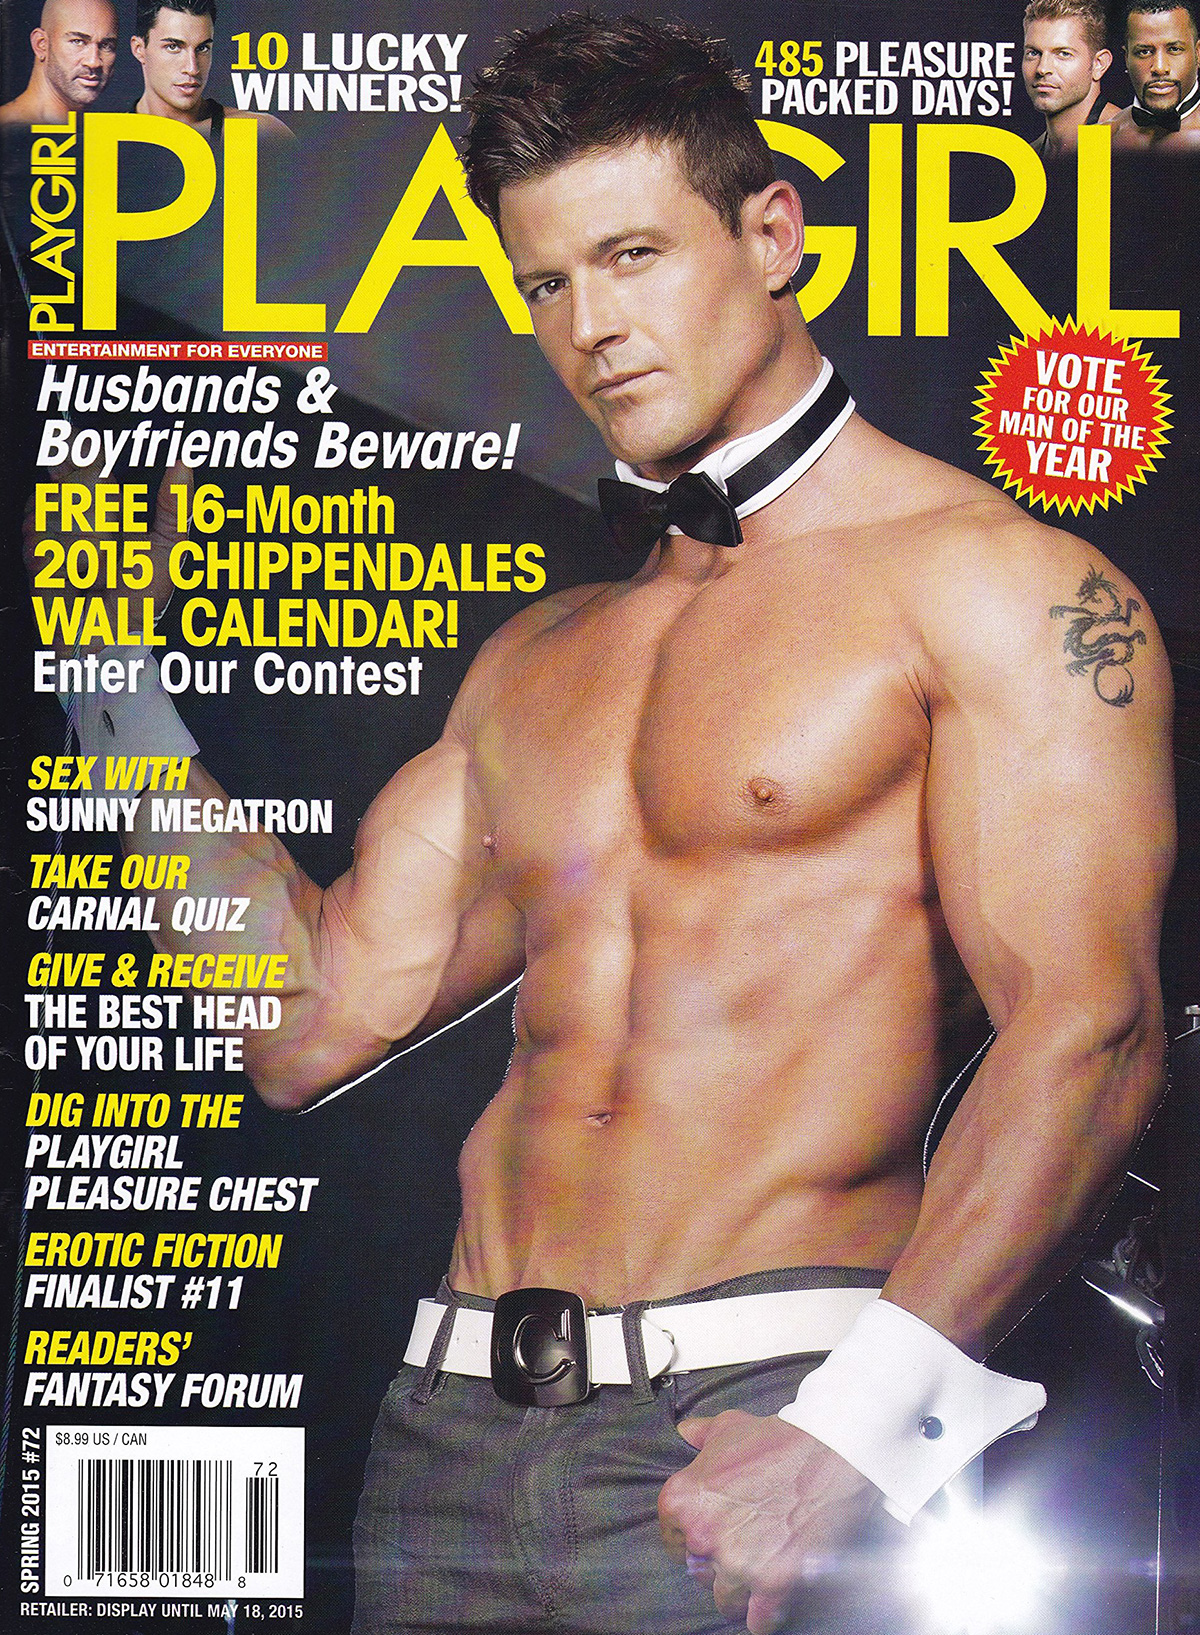 Playgirl # 72, Spring 2015 magazine back issue Playgirl magizine back copy Playgirl # 72, Spring 2015 Adult Heteresexual Women and Gay Mens Magazine Back Issue Published by Drake Publishers. Husbands & Boyfriends Beware!.